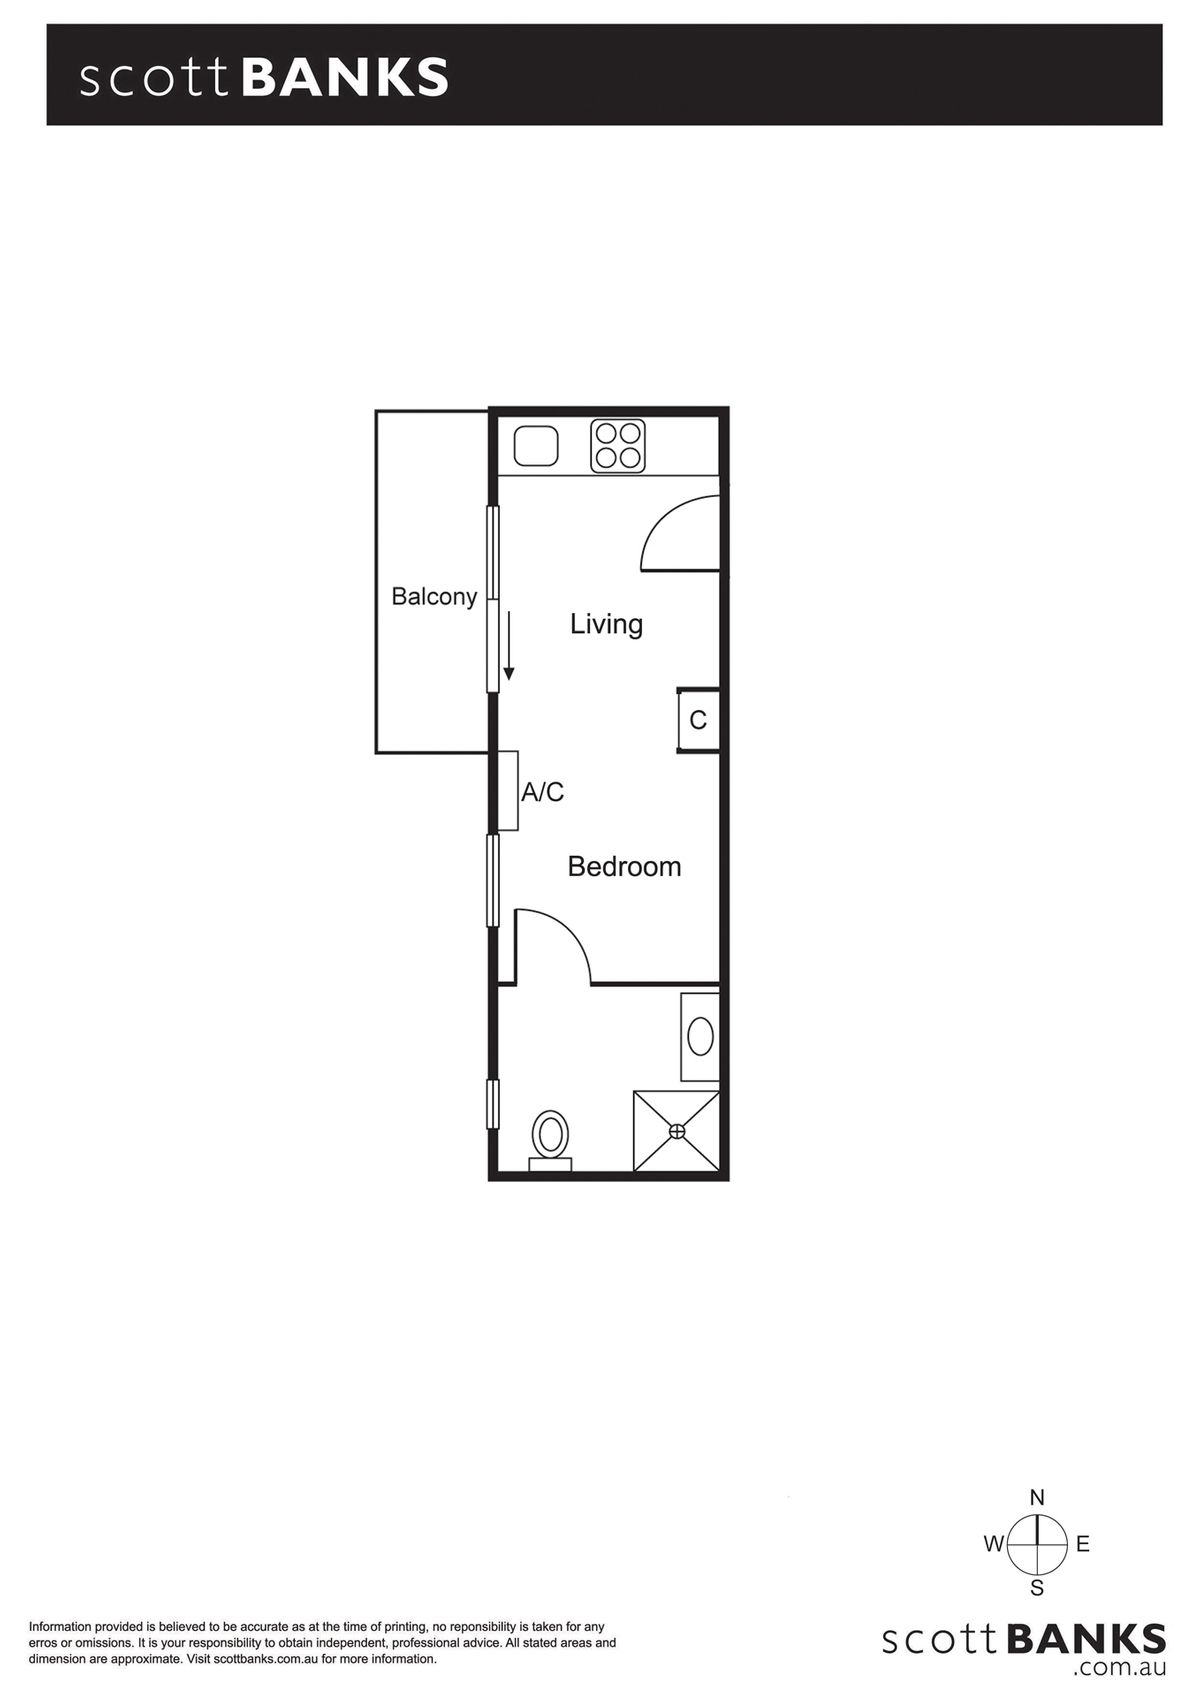 LoRes Floorplan 322 5 Dudley Street Caulfield East without measurements